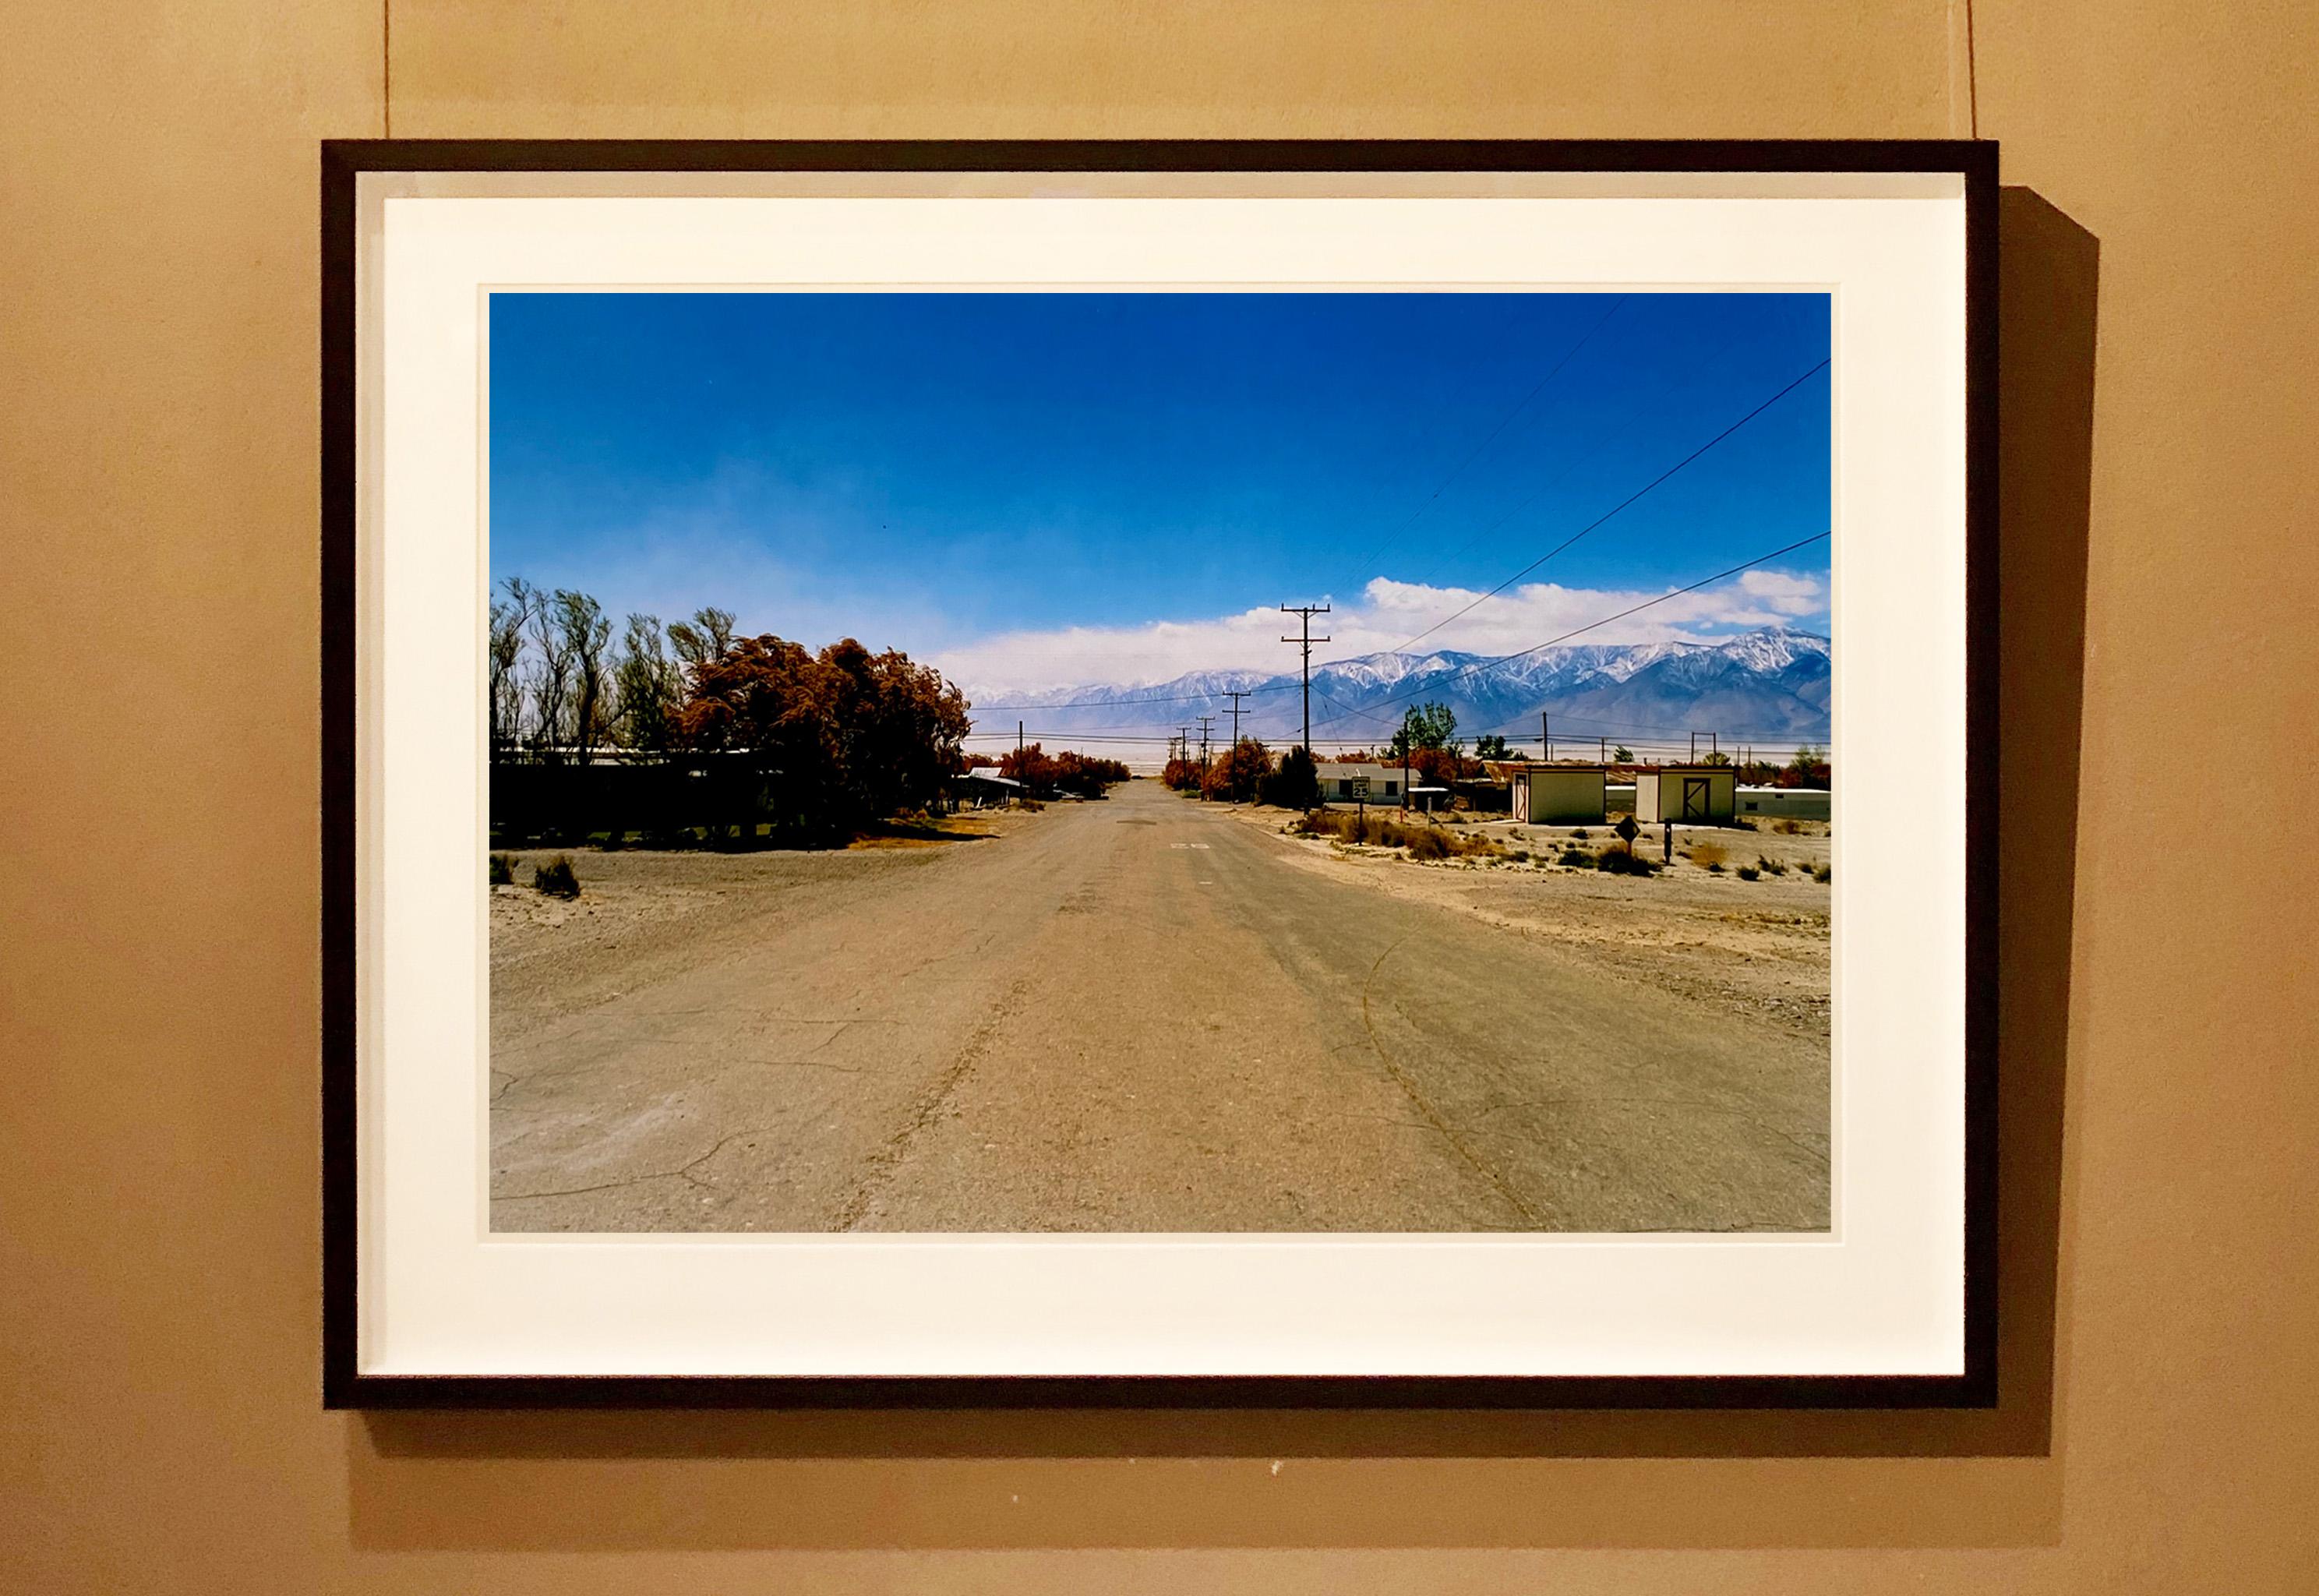 Malone Street, Keeler, California - American Landscape Color Photography - Brown Landscape Photograph by Richard Heeps